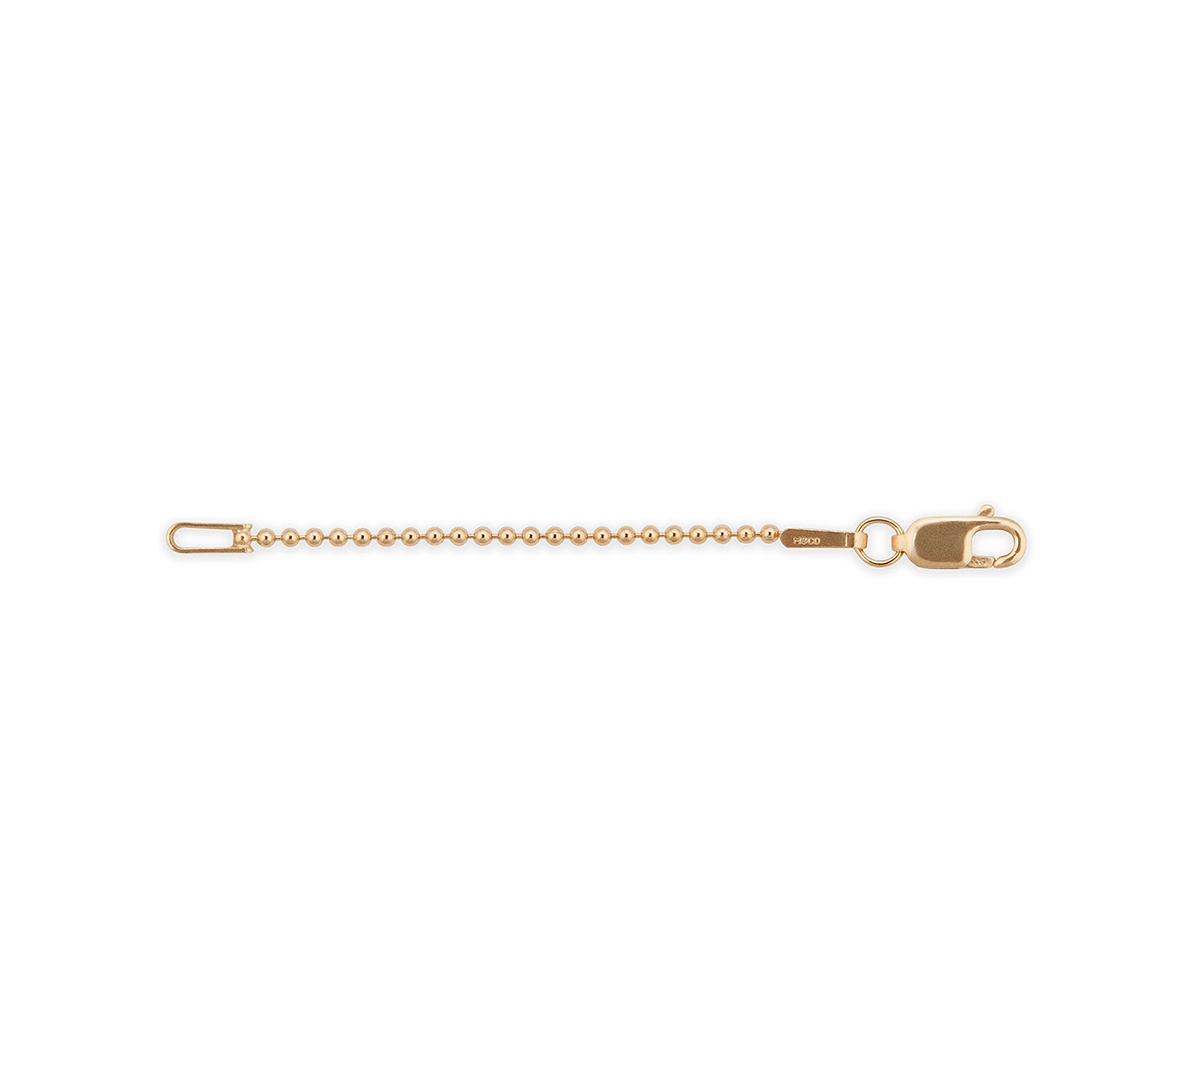 Bead Link 2" Chain Extender in Gold-Filled - Gold-Filled